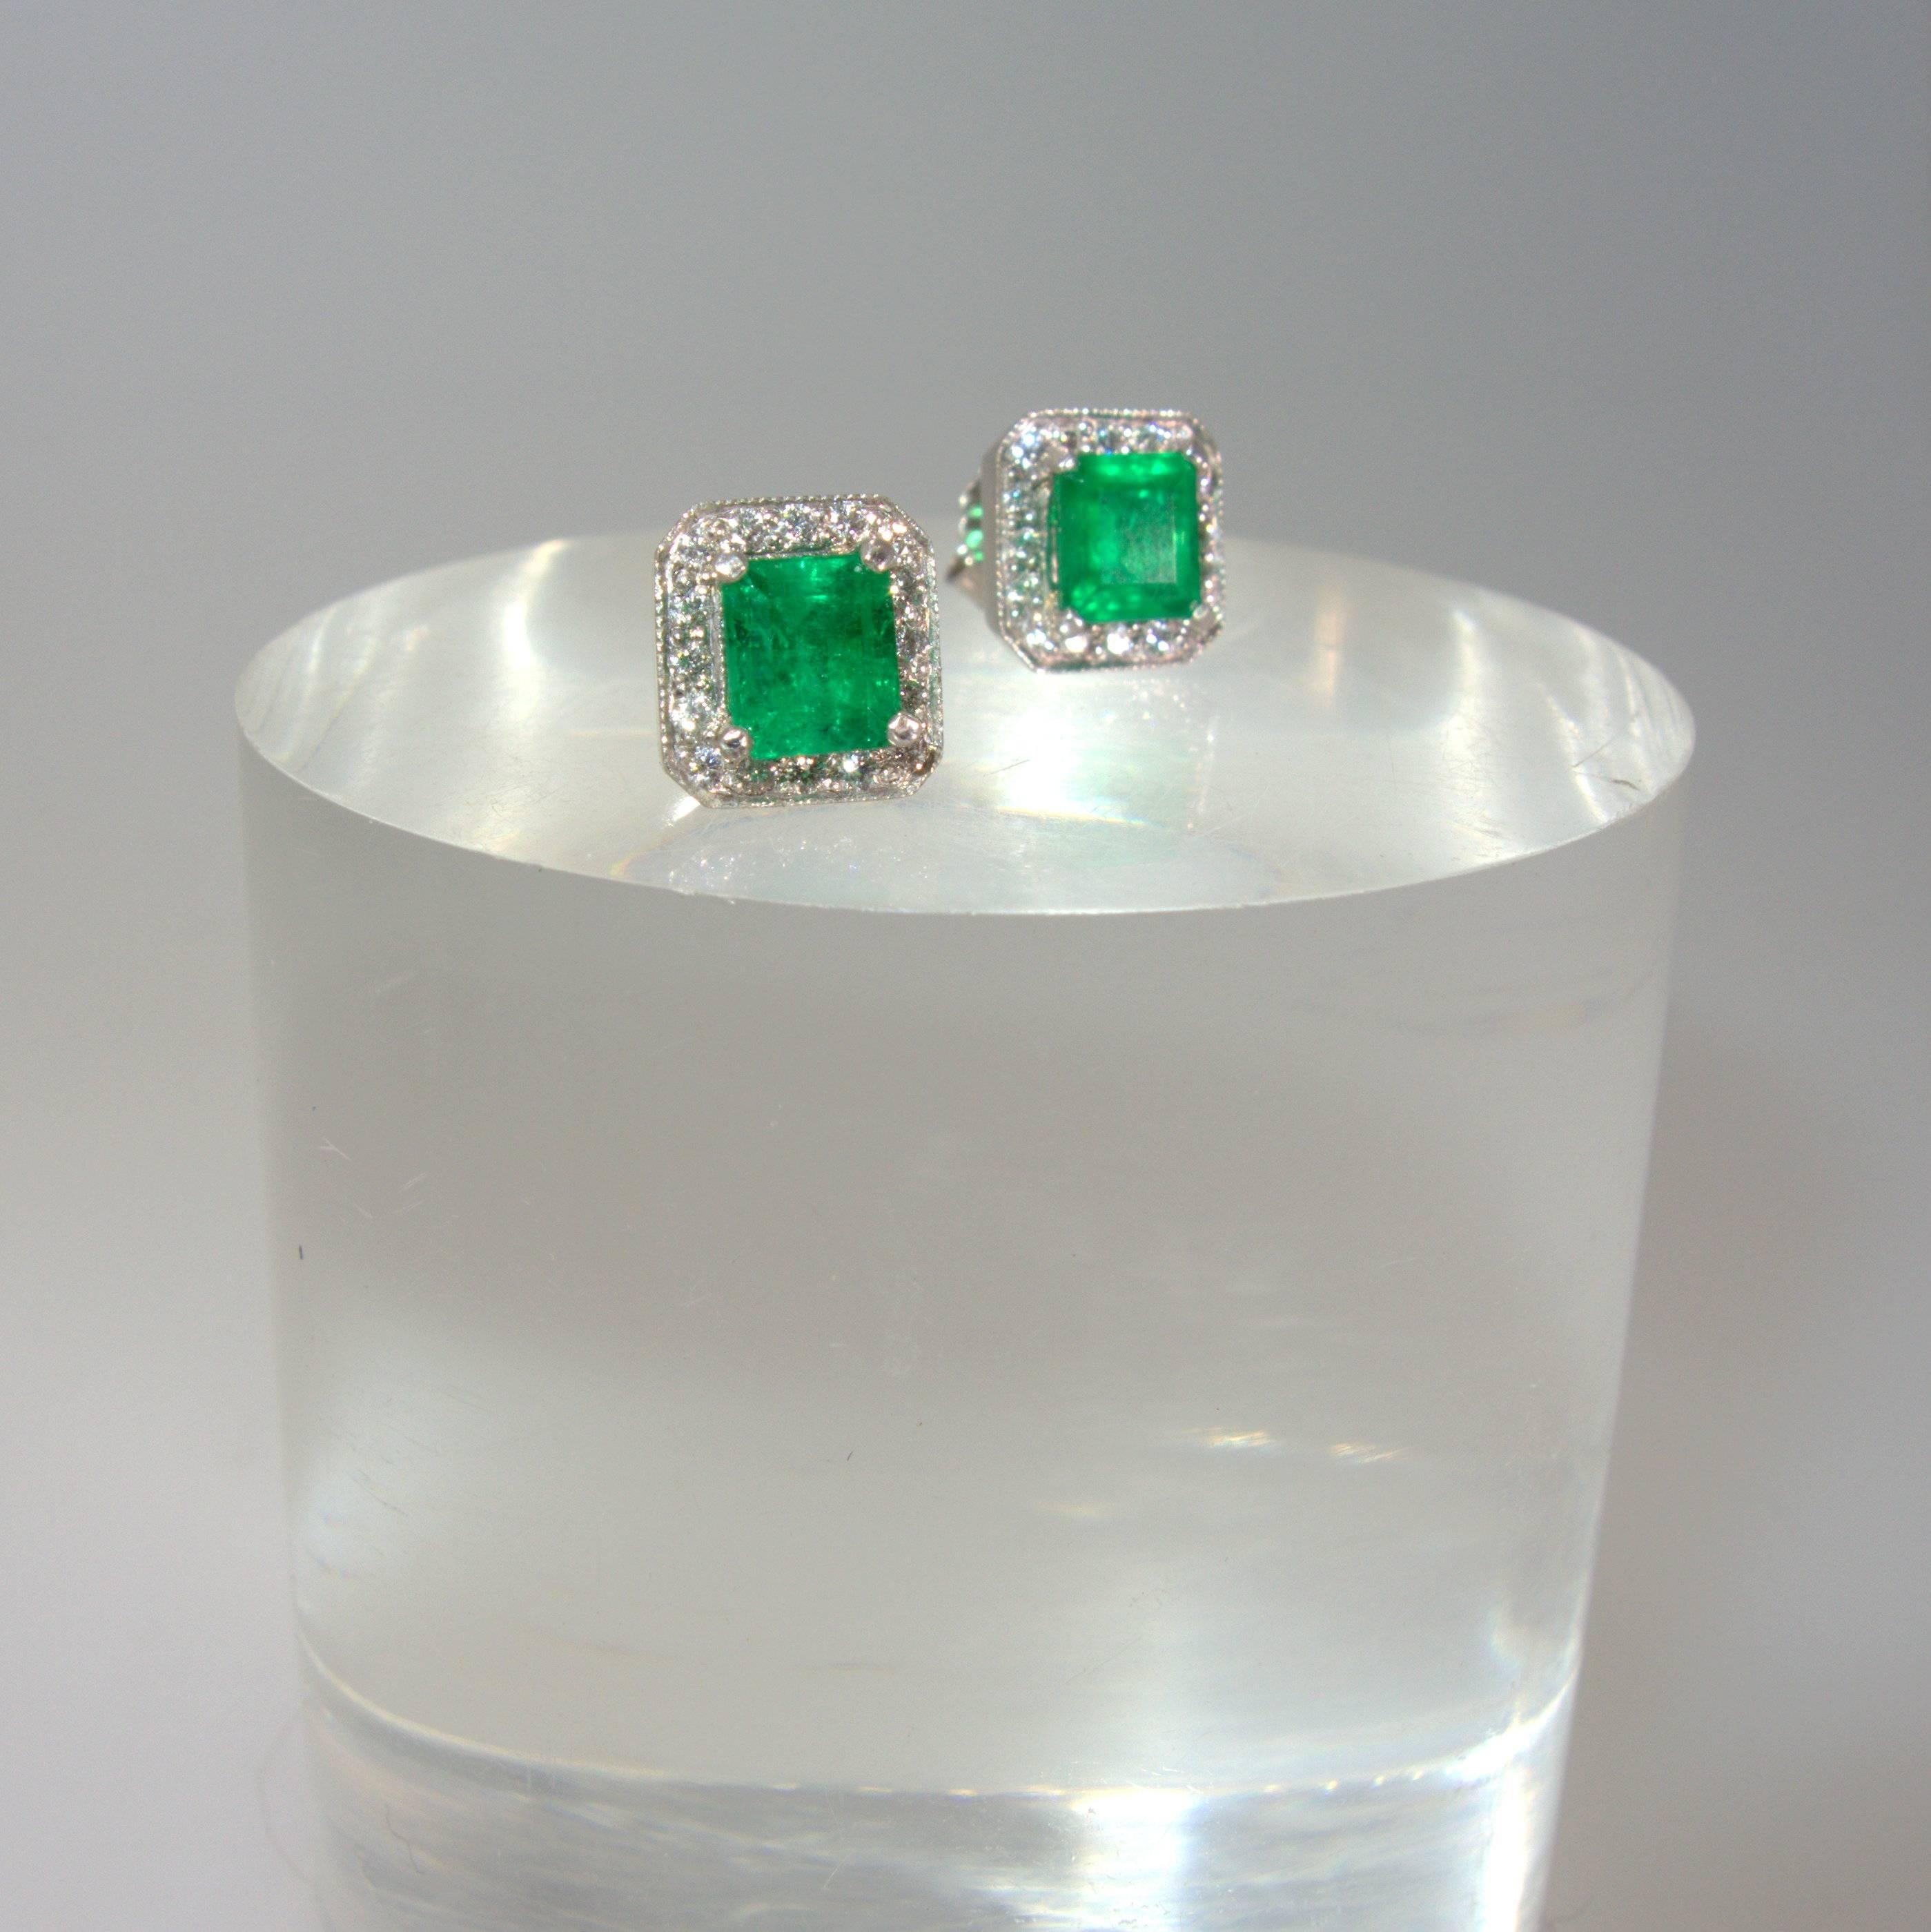 32 fine white round modern brilliant cut diamonds (one third of a carat), accent the bright green emeralds which weigh approximately 1.60 cts totally.  The earrings measure 5/16th (nearly 3.8ths) square.